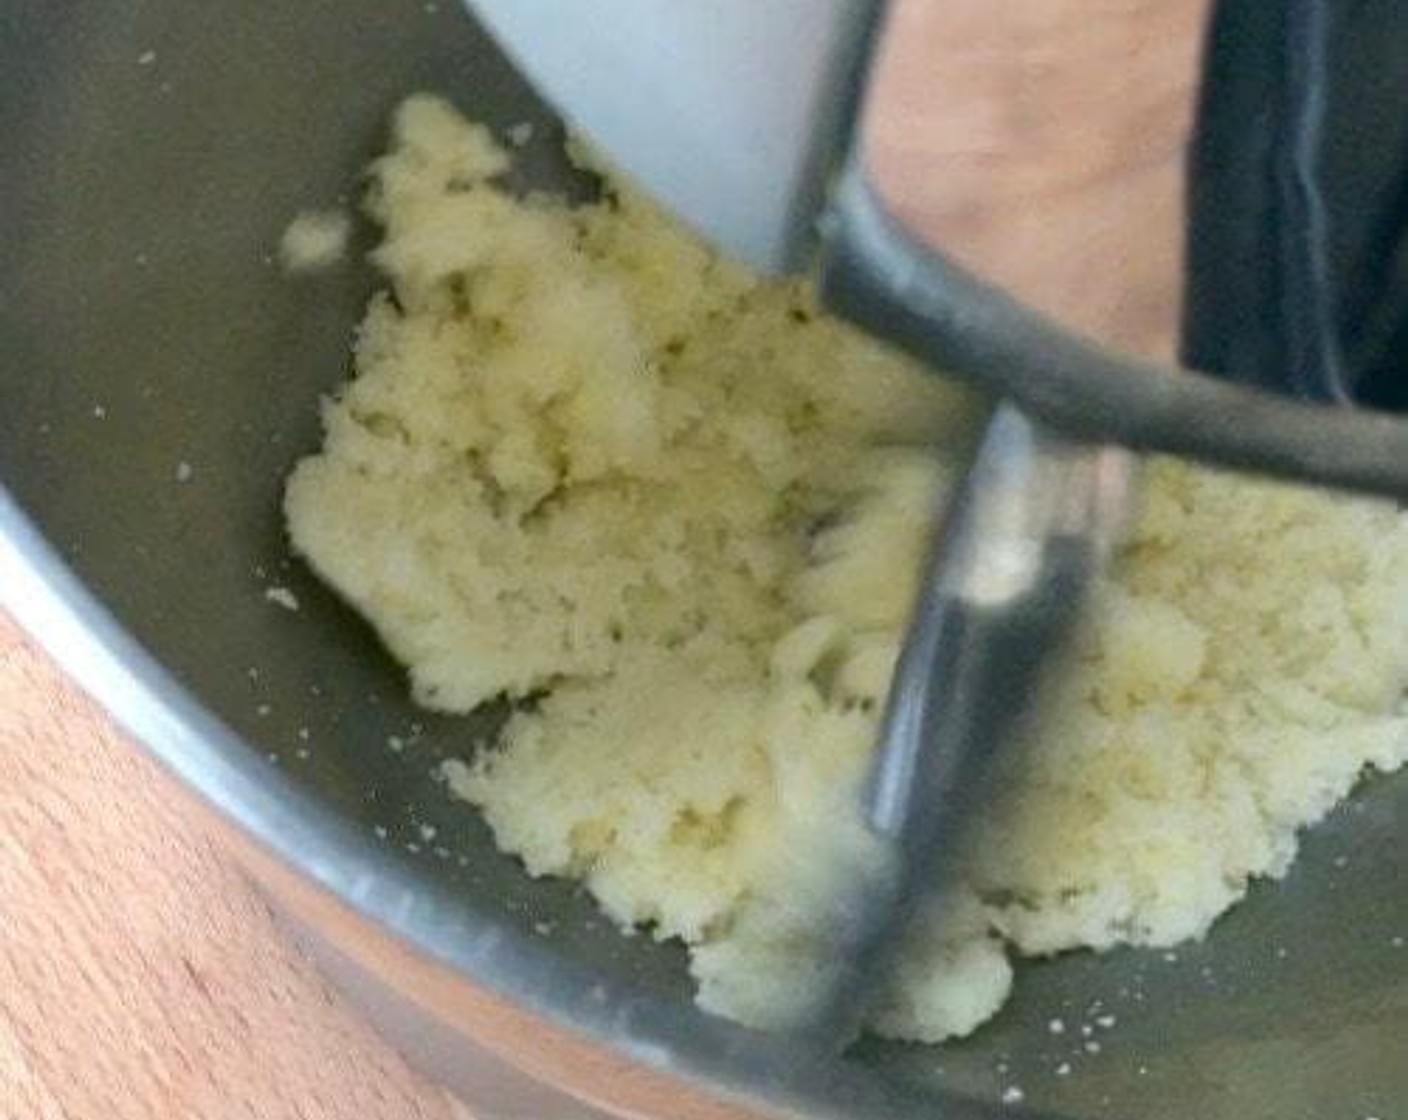 step 4 In the bowl of an electric mixer fitted with a paddle attachment, beat Butter (1/4 cup) and Granulated Sugar (3/4 cup) on medium speed until batter is light and fluffy. Stop the mixer occasionally to scrape down the sides of the bowl.